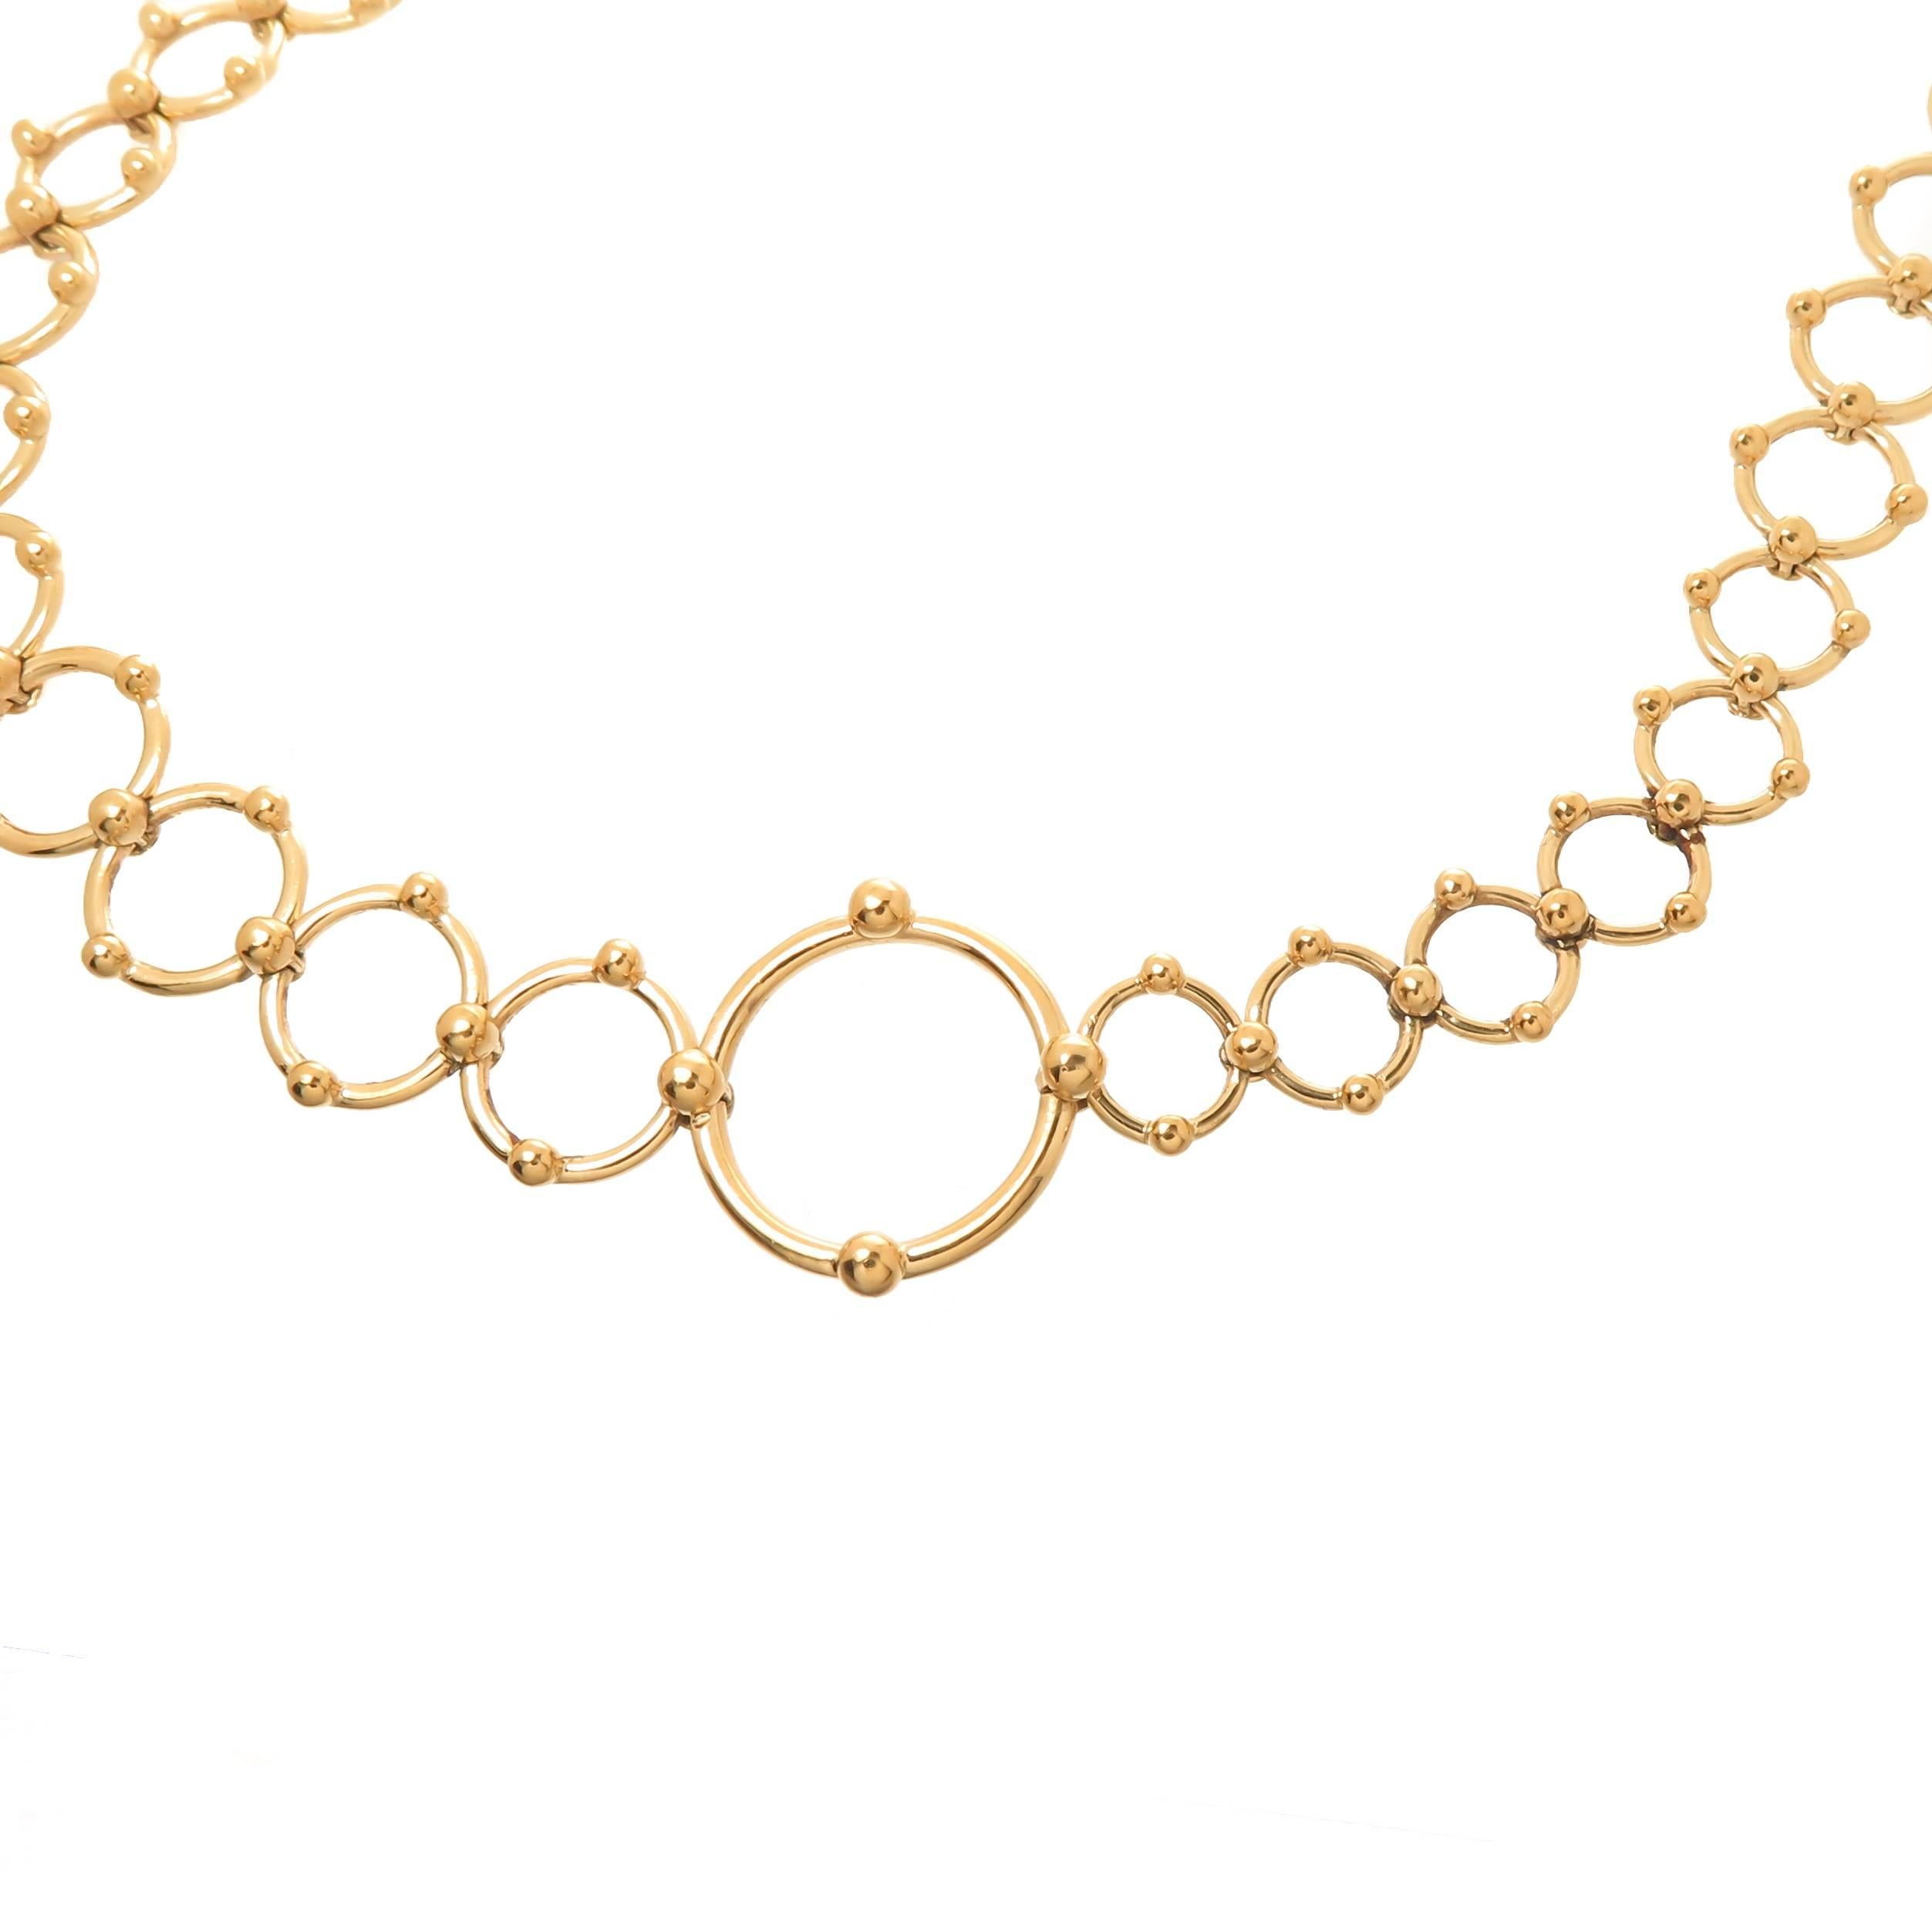 Circa 2005 Tiffany & Company 18k Yellow Gold Circles necklace, measuring 30 inches in length and weighing 61.3 Grams. Consisting of Sold Links in tapering sizes from 1/4 inch up to 5/8 inch. Signed on the Largest circle link. Comes in the original